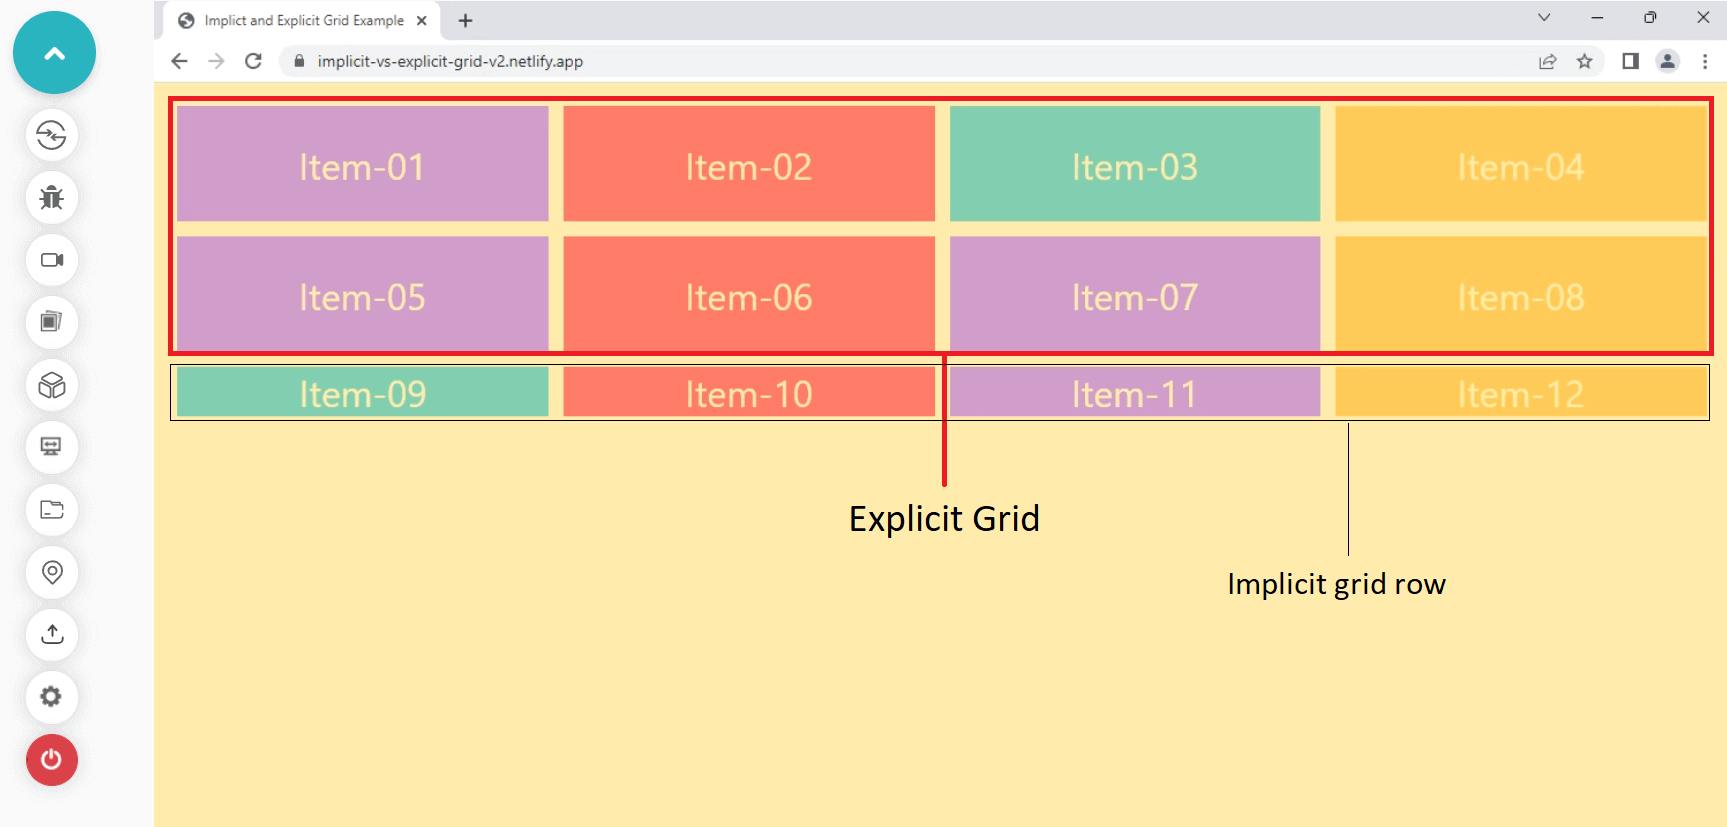 grid-template-columns and grid-template-rows